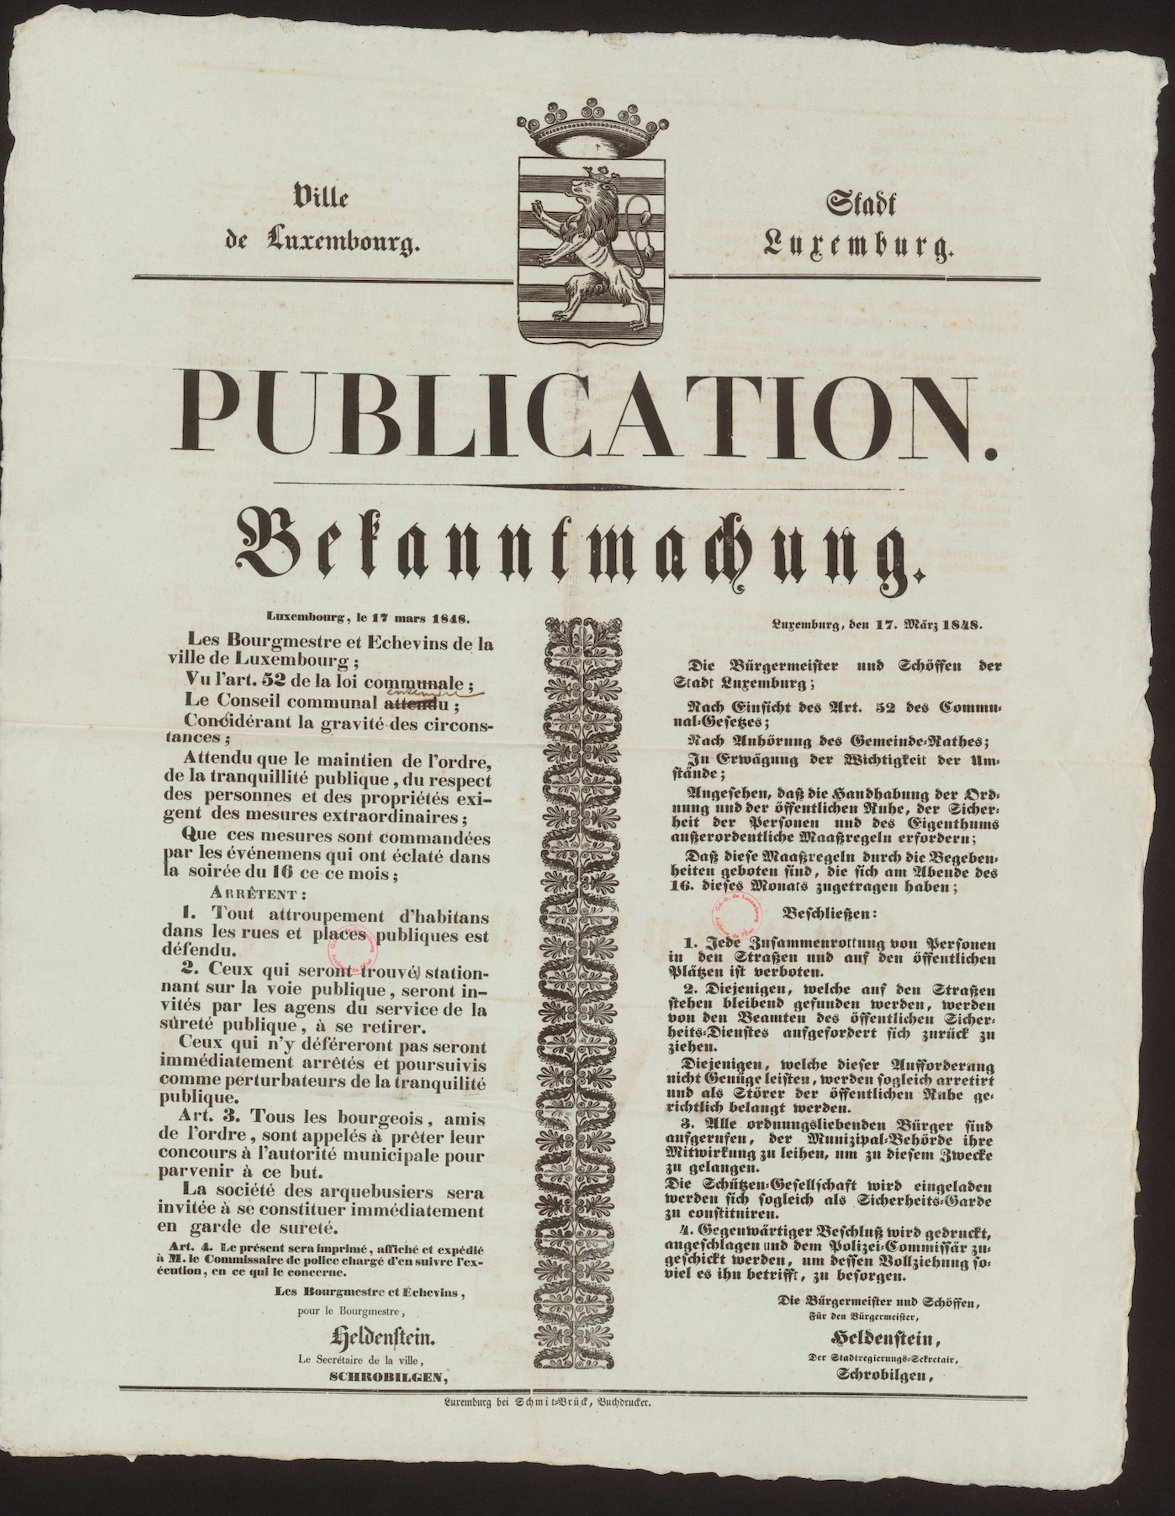 Archives nationales de Luxembourg , Proclamation of the city government after the riots of 16 March 1848 (17 March 1848), ANLux, F-007, available here
